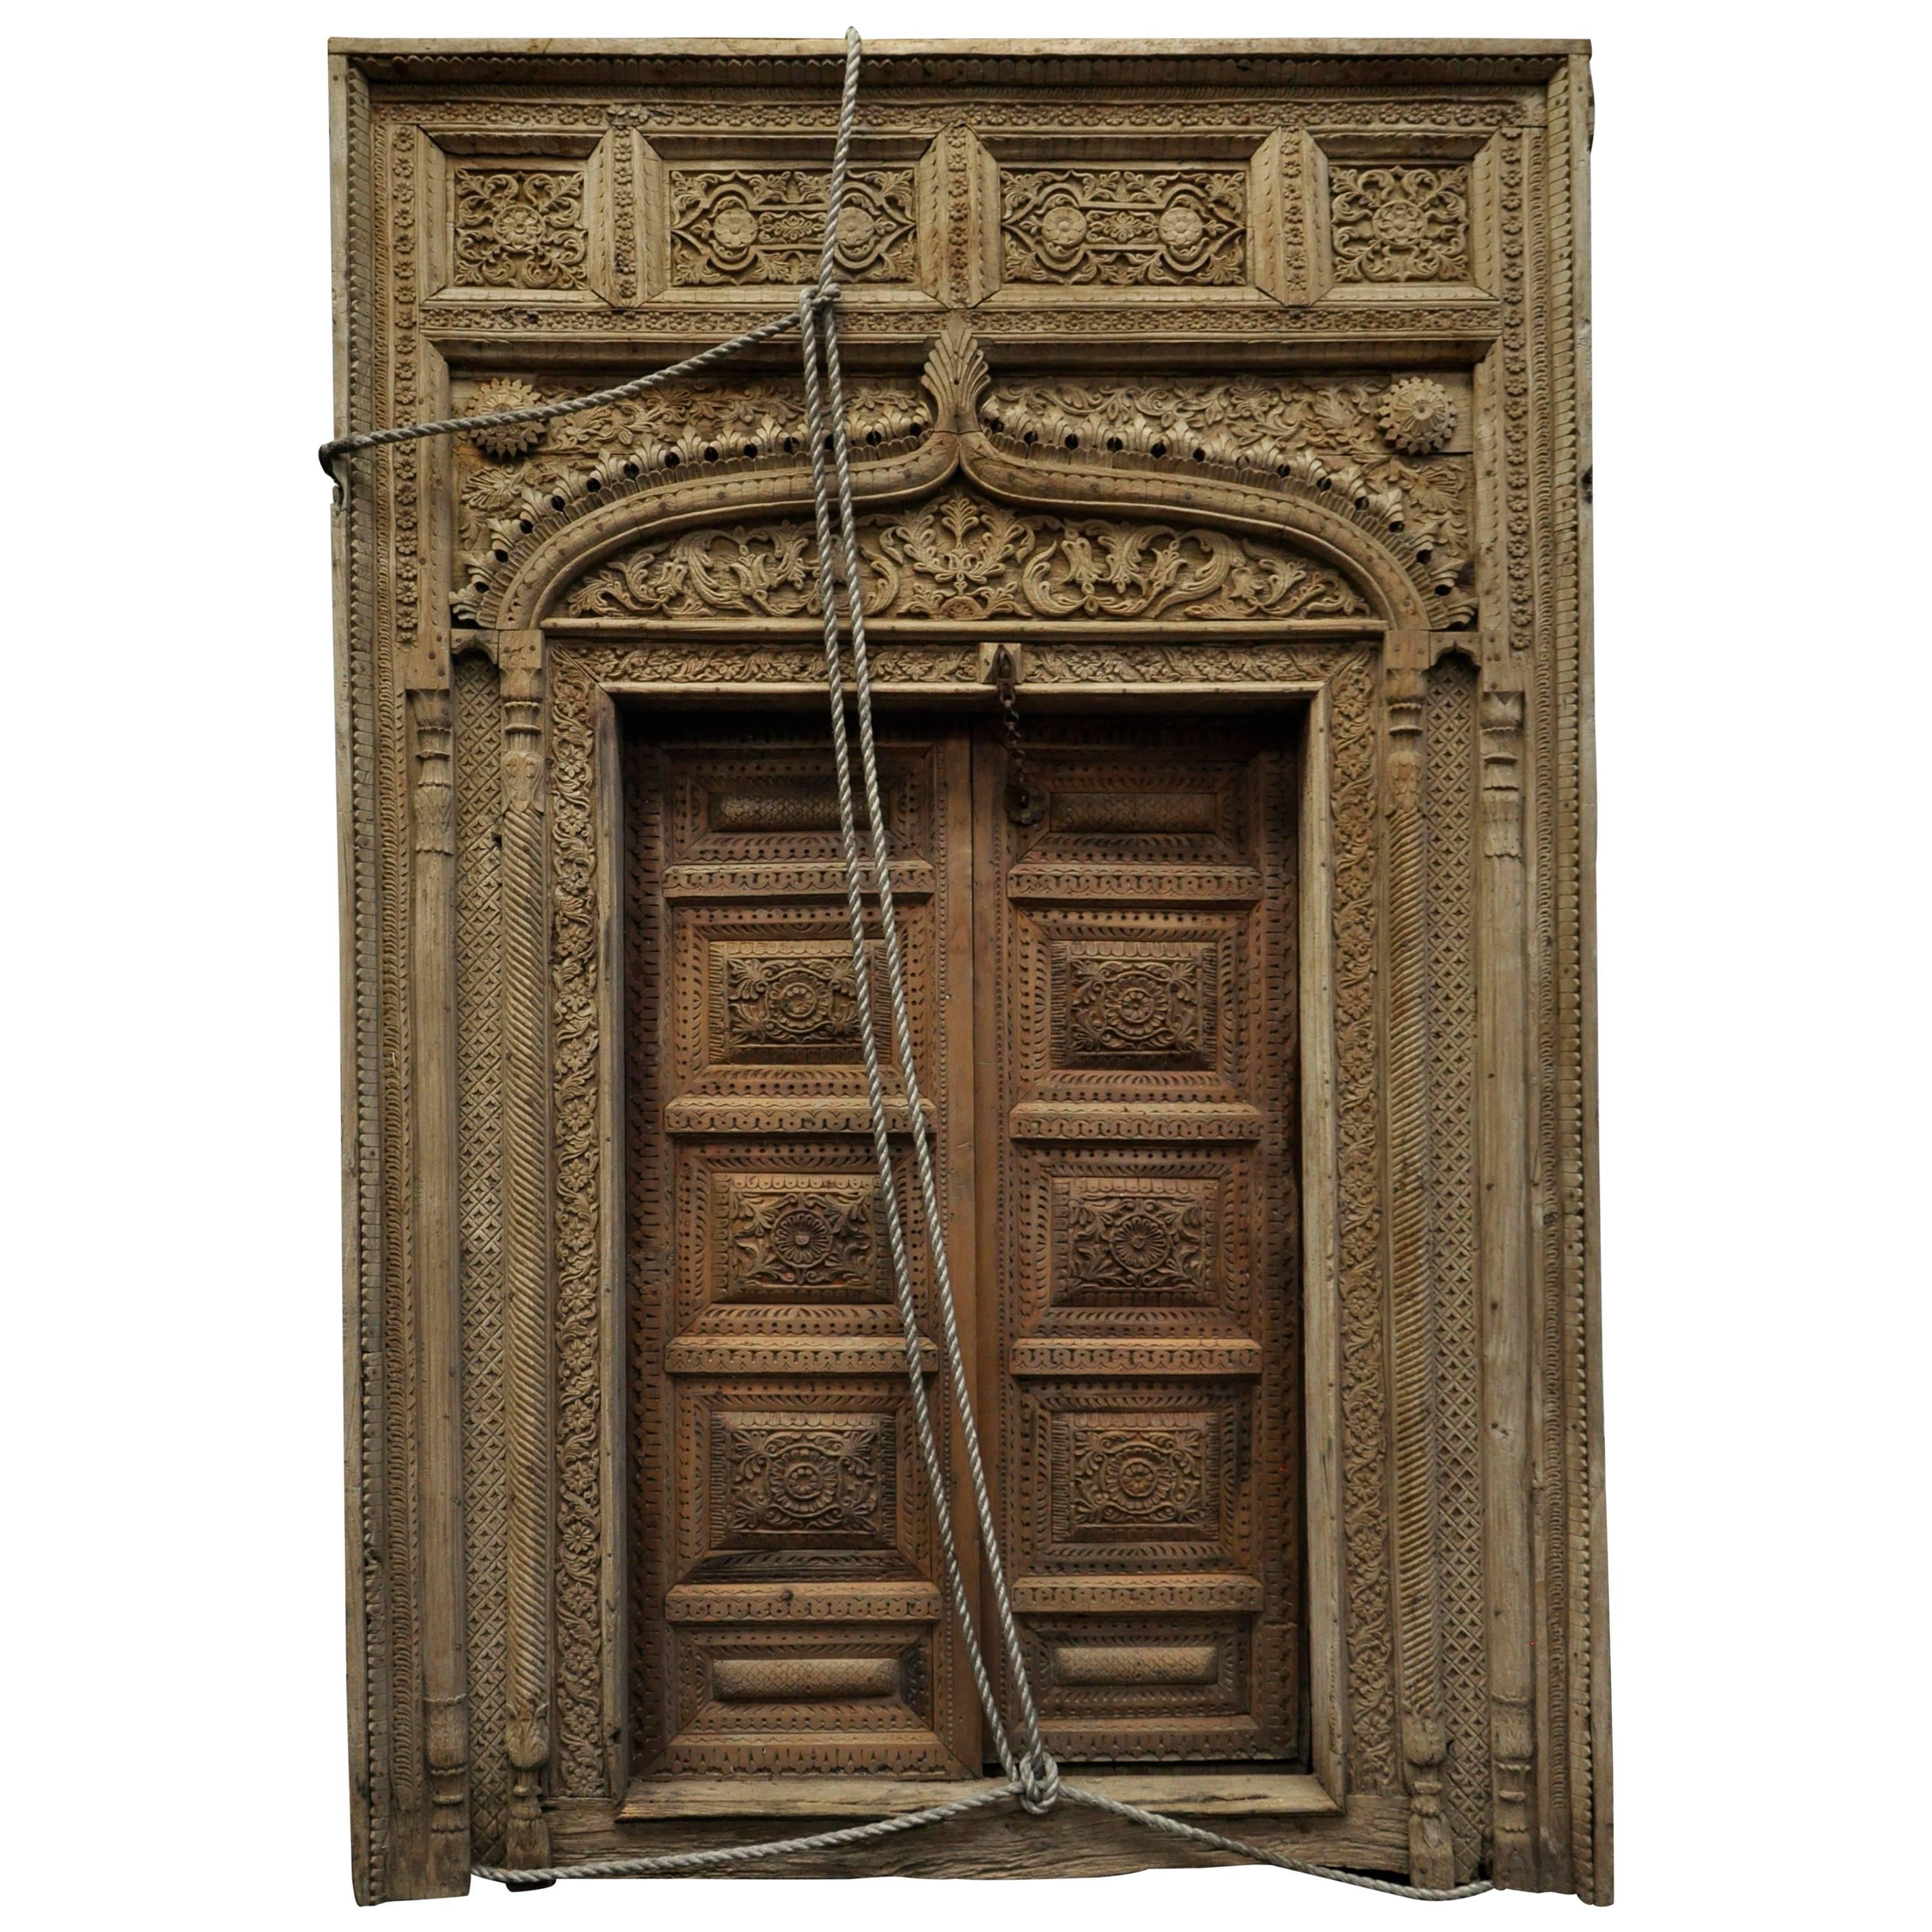 Indian Carved Wood Door and Window Frame, Period 19th Century For Sale